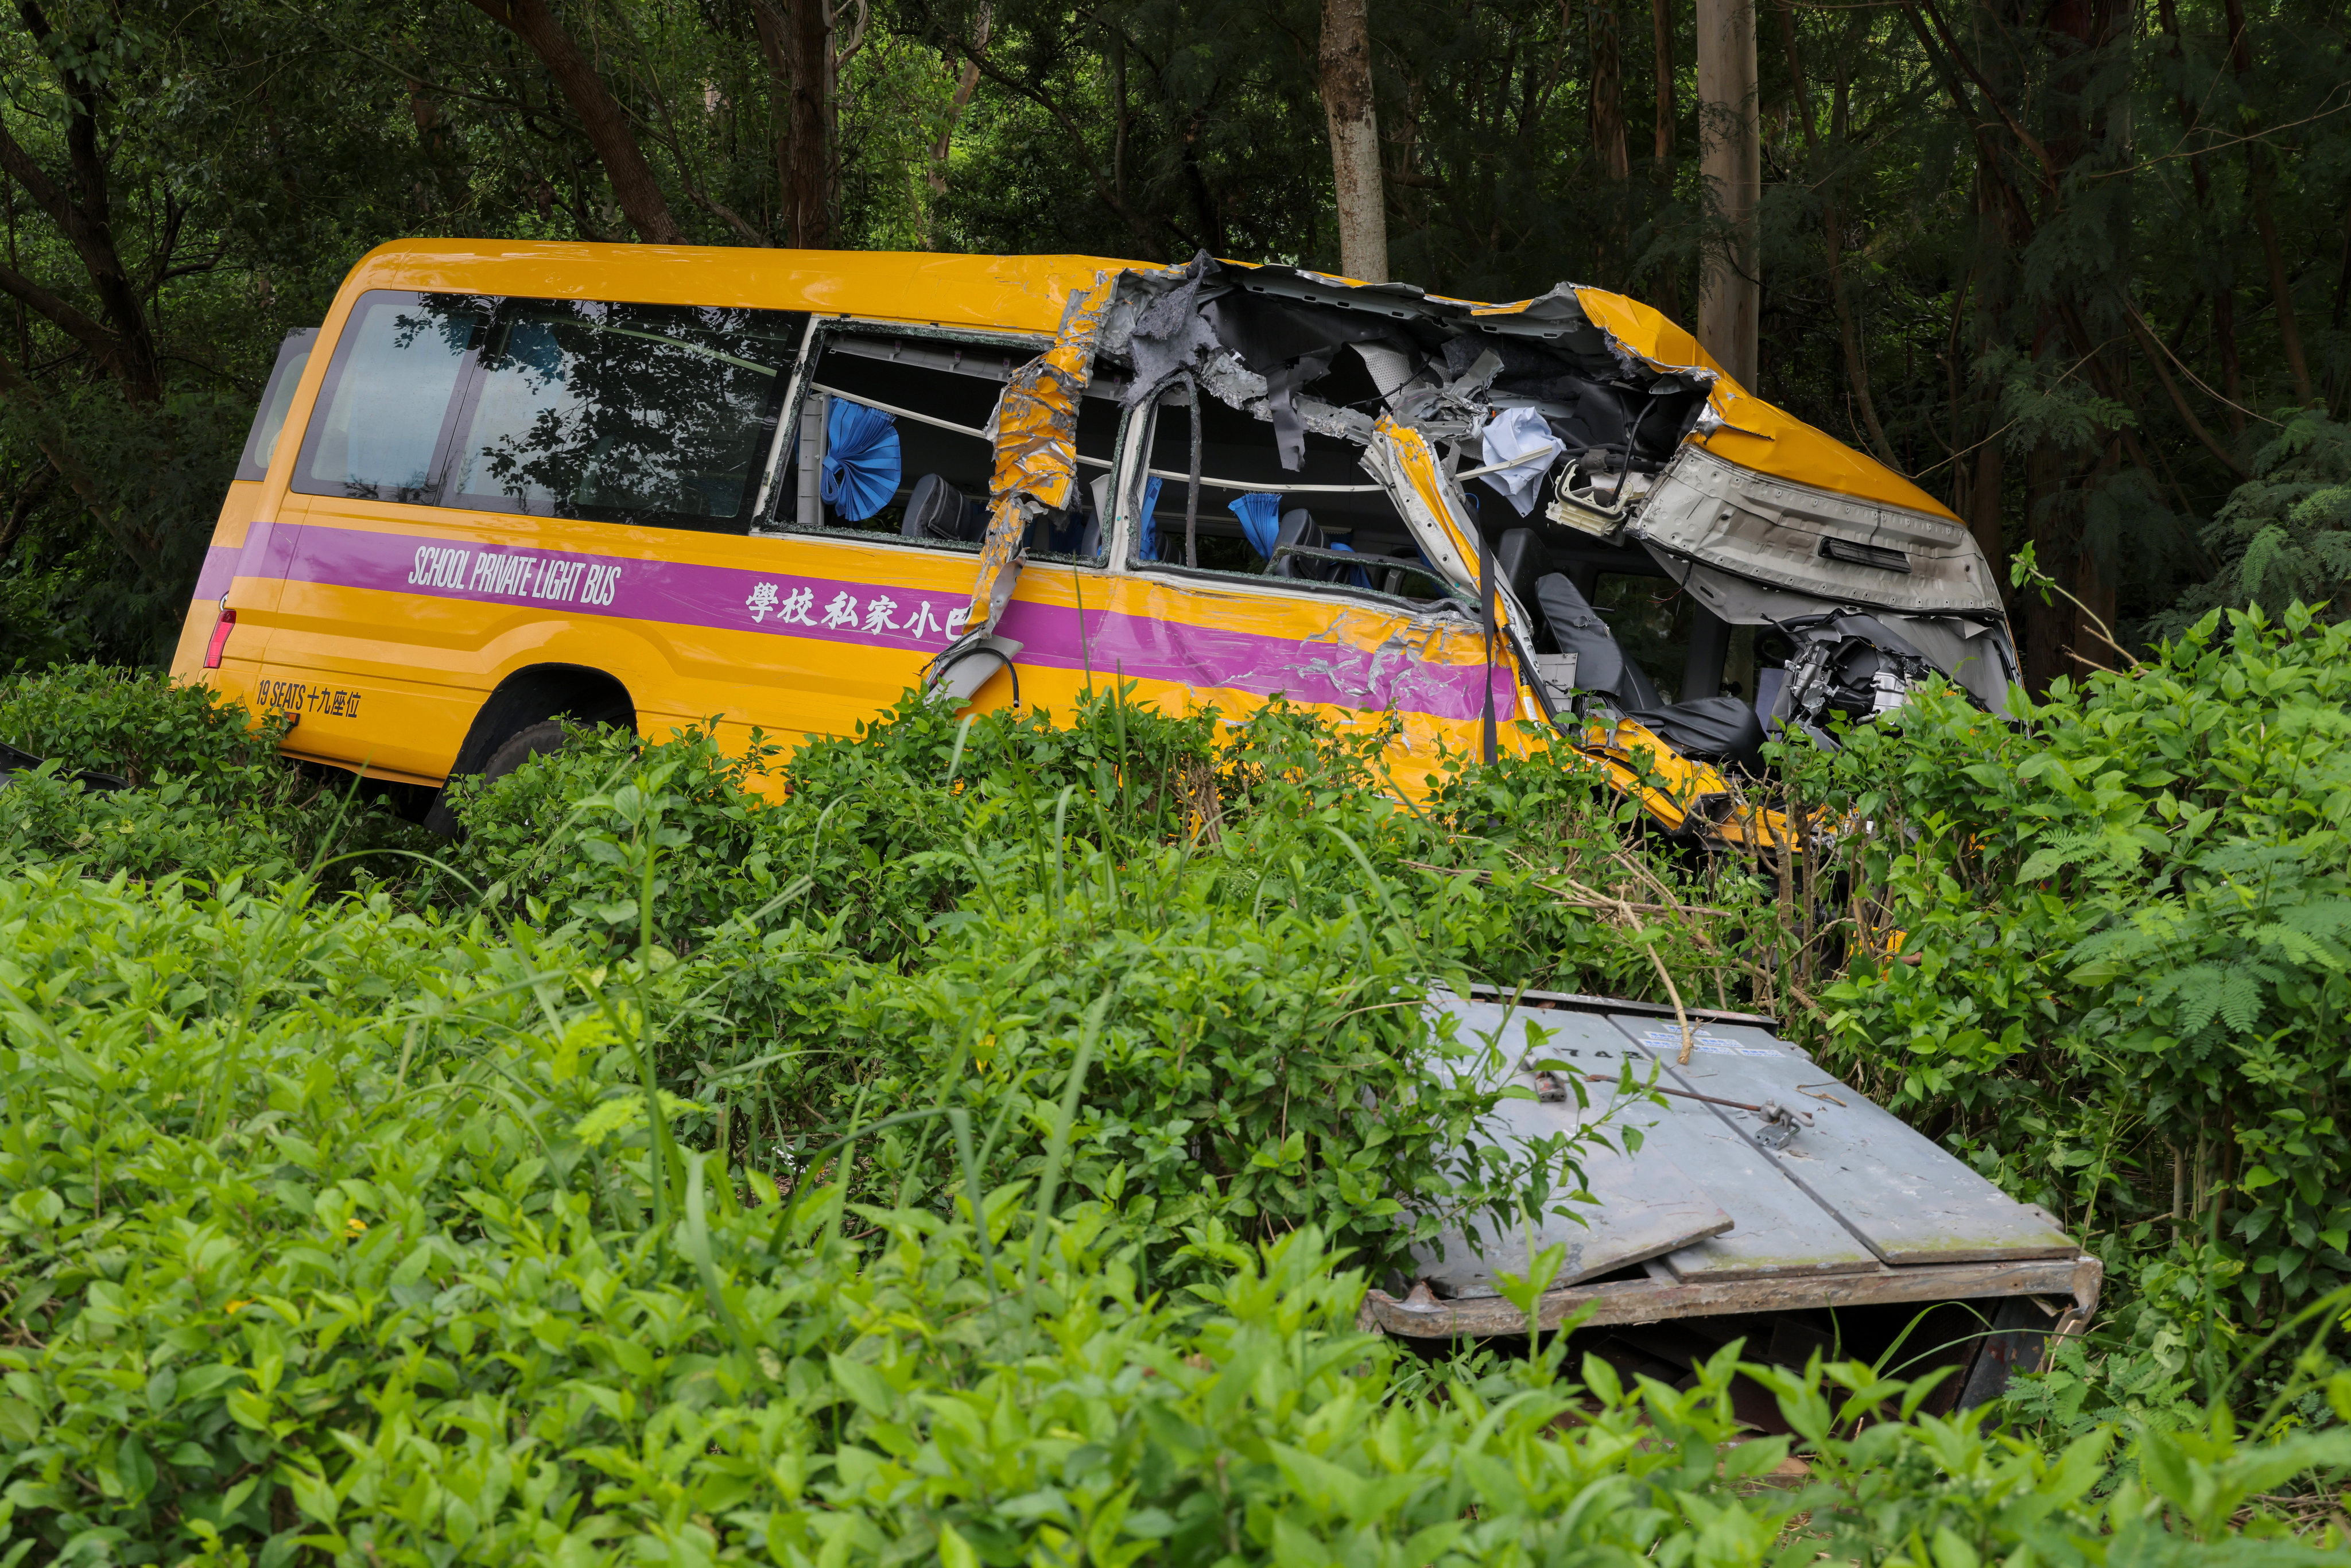 After it collided with the double-decker vehicle, the school bus veered off the single lane road and crashed into the trees, leaving its front half damaged. Photo: Jelly Tse